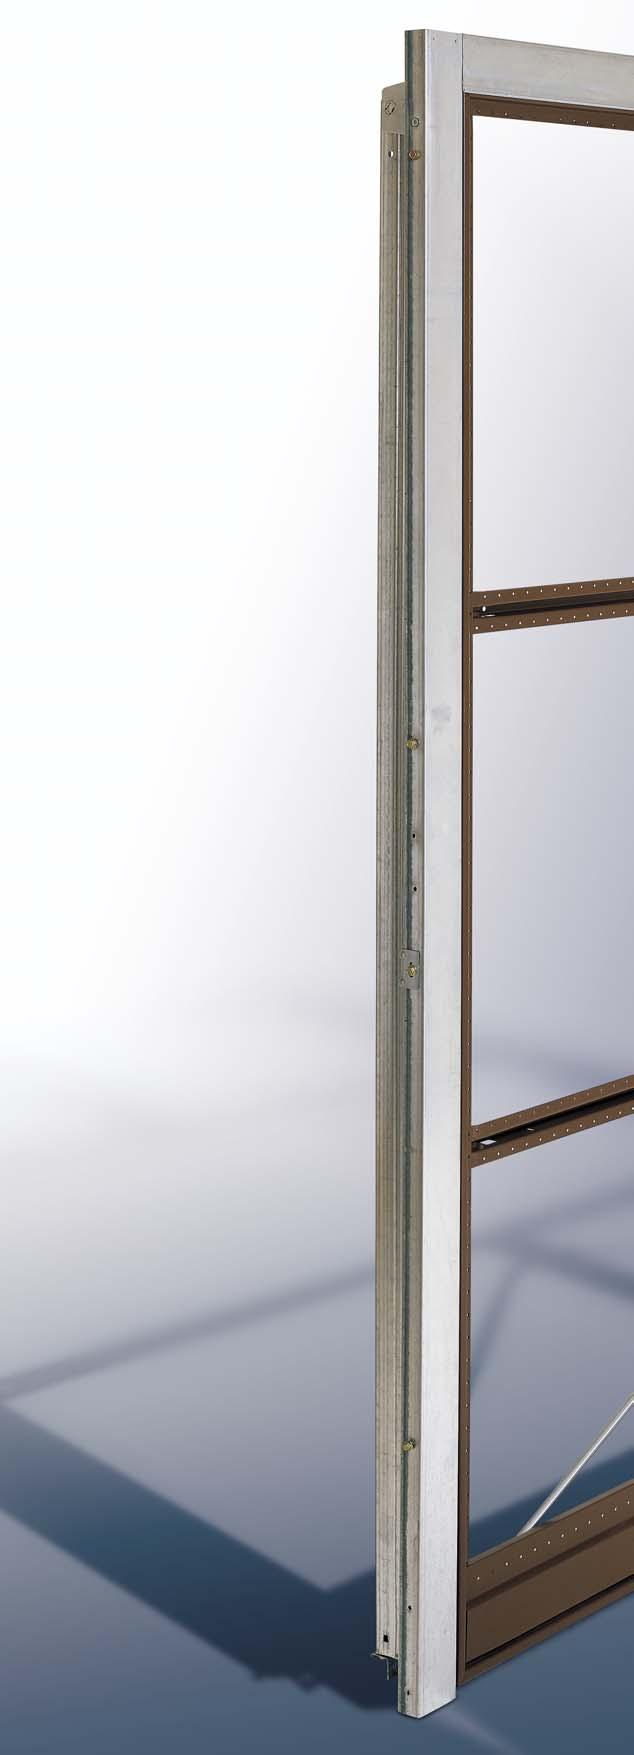 Design your very own timber door: You cut the timber to size. The frame and struts are pre-drilled at 30 mm spacings.